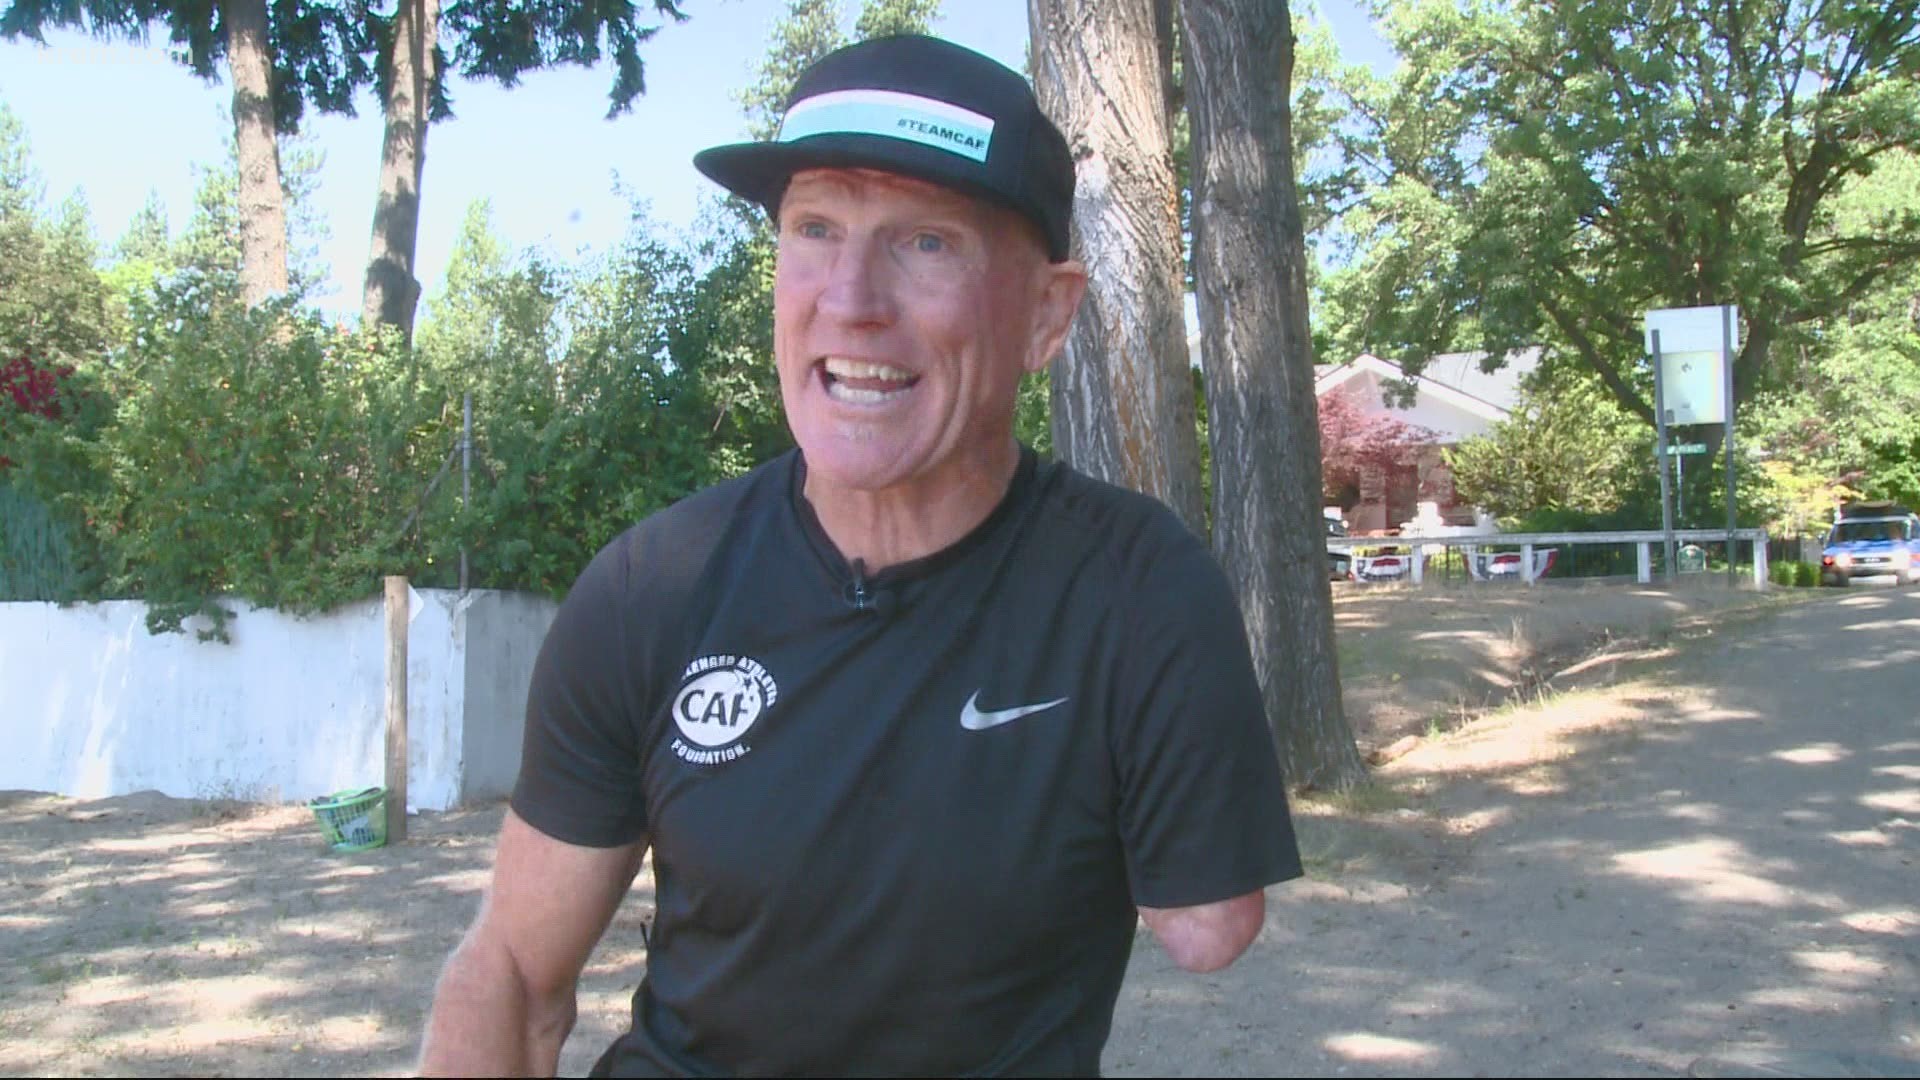 Athletes who are missing an arm or who survived a stroke are participating in the race in Coeur d'Alene this year.